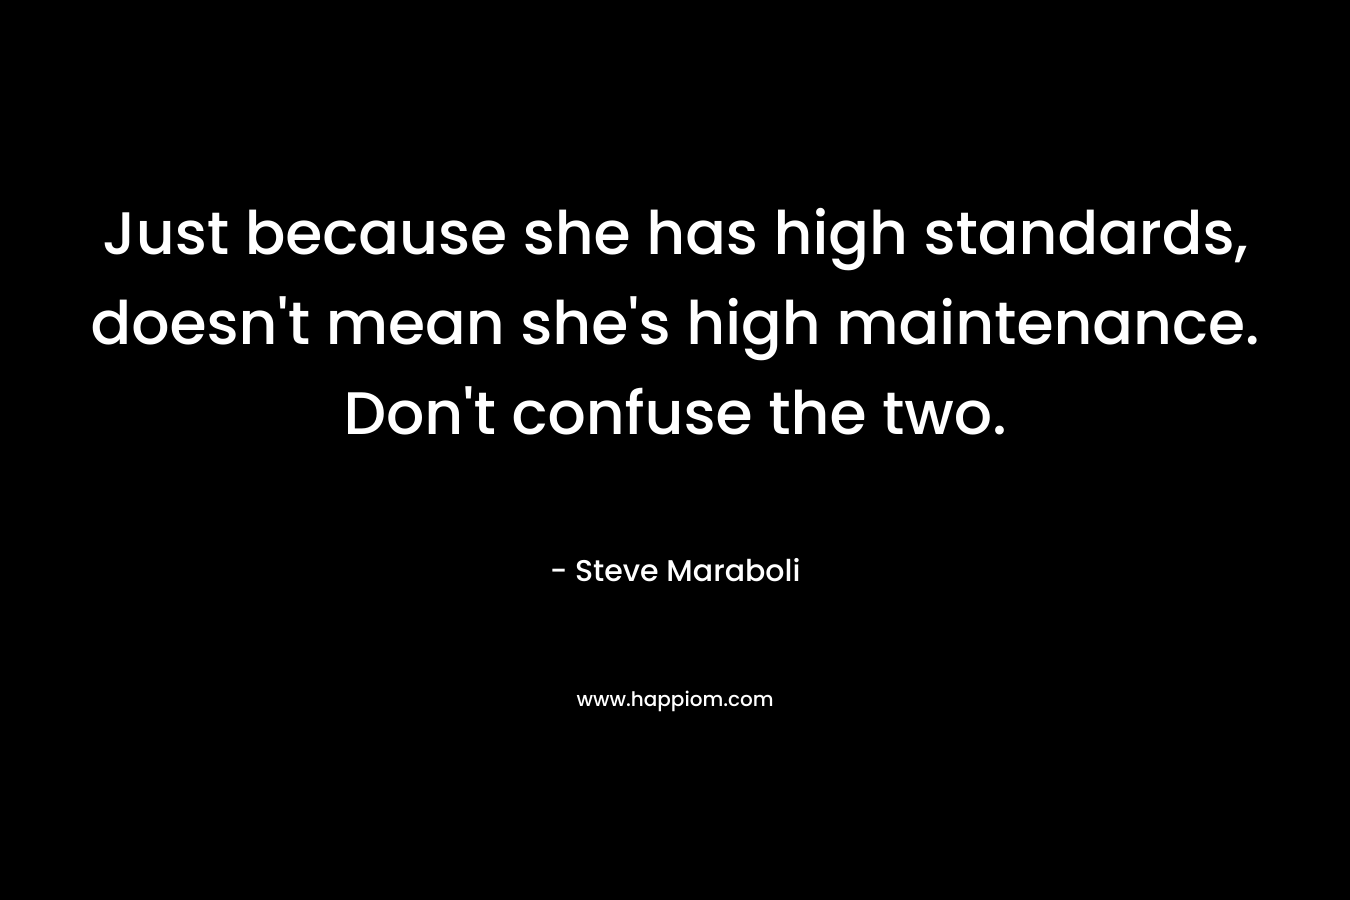 Just because she has high standards, doesn't mean she's high maintenance. Don't confuse the two.